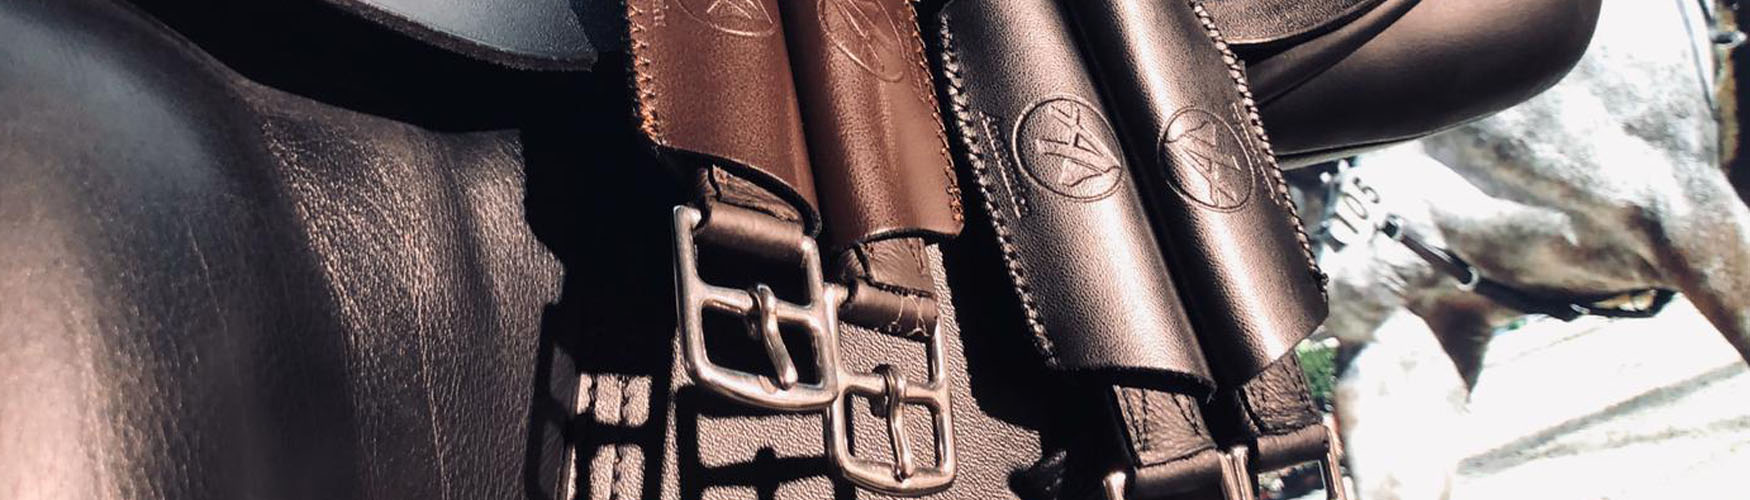 Anatomica stirrup leathers: the stirrup leather you barely feel